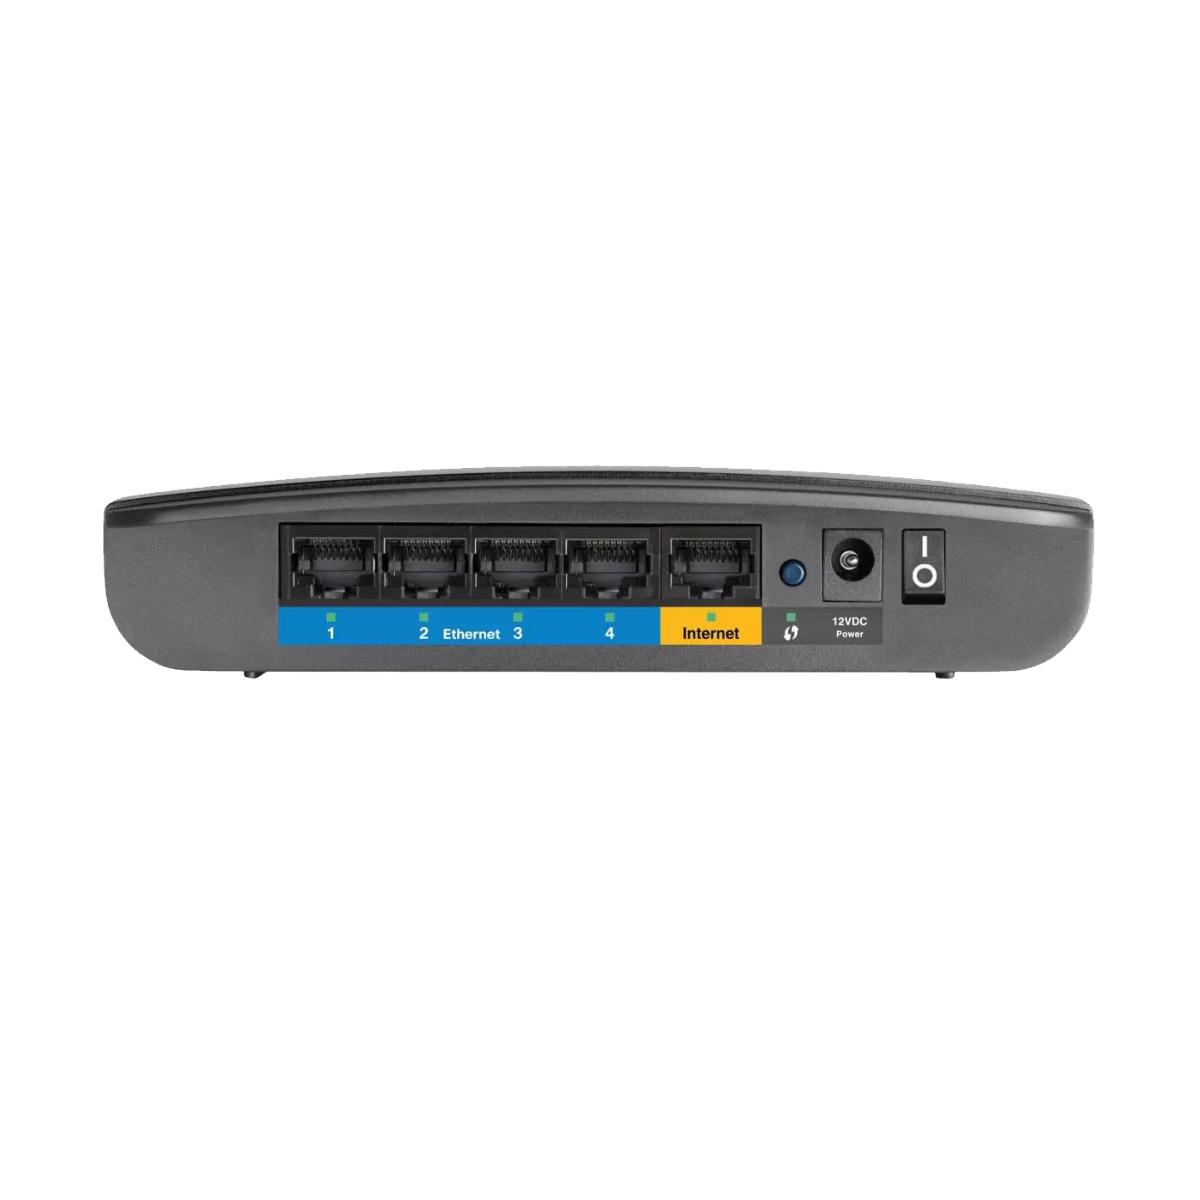 Roteador Linksys E900 N300 Wireless Anatel - Outlet